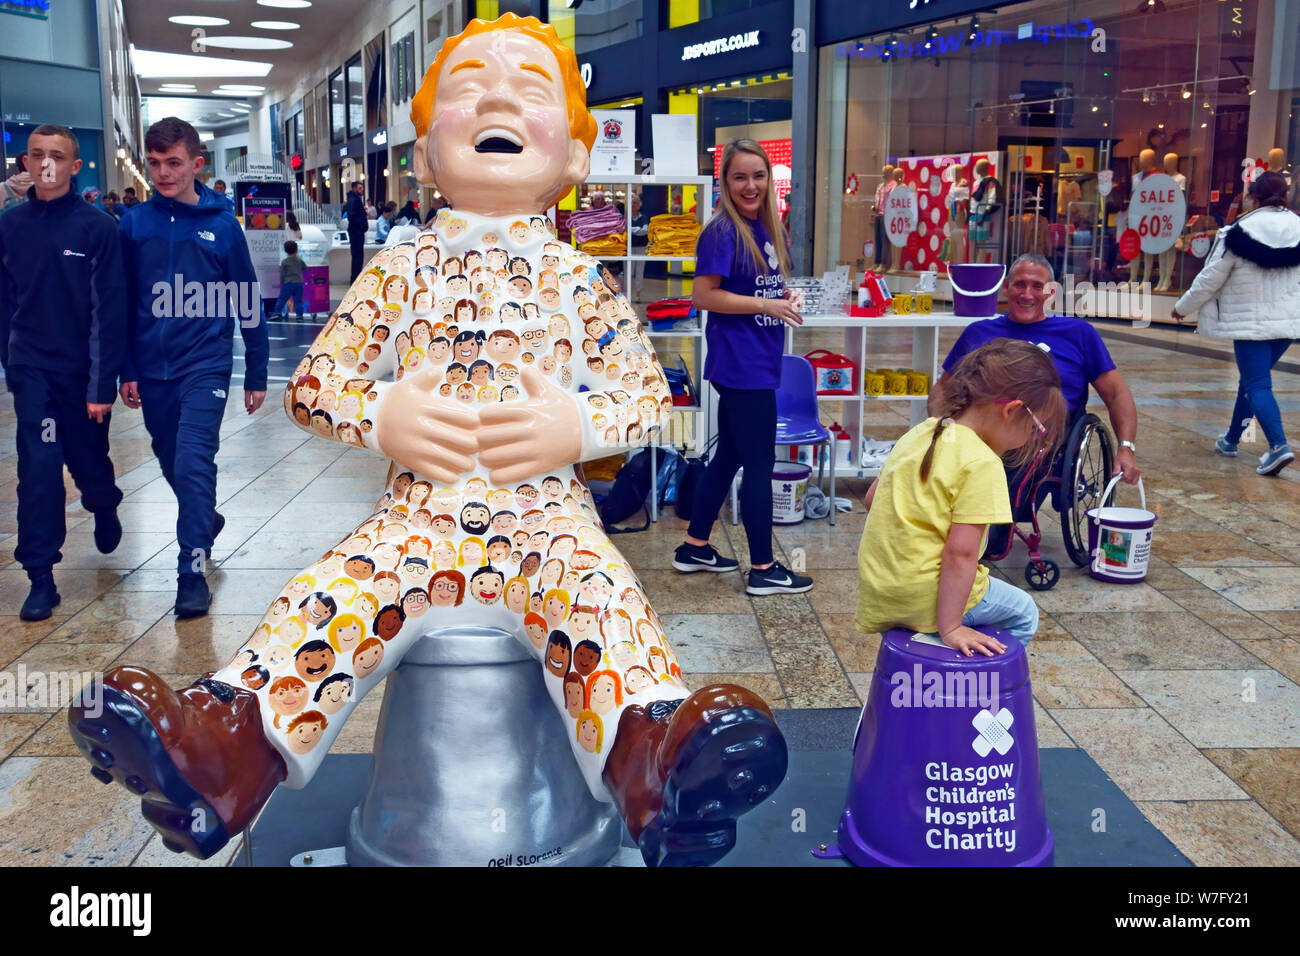 Oor Wullie in Braehead Shopping Centre, Glasgow. Part of the Oor Wullie's Big Bucket Trail which aims to raise money for Children's Hospital charities Stock Photo